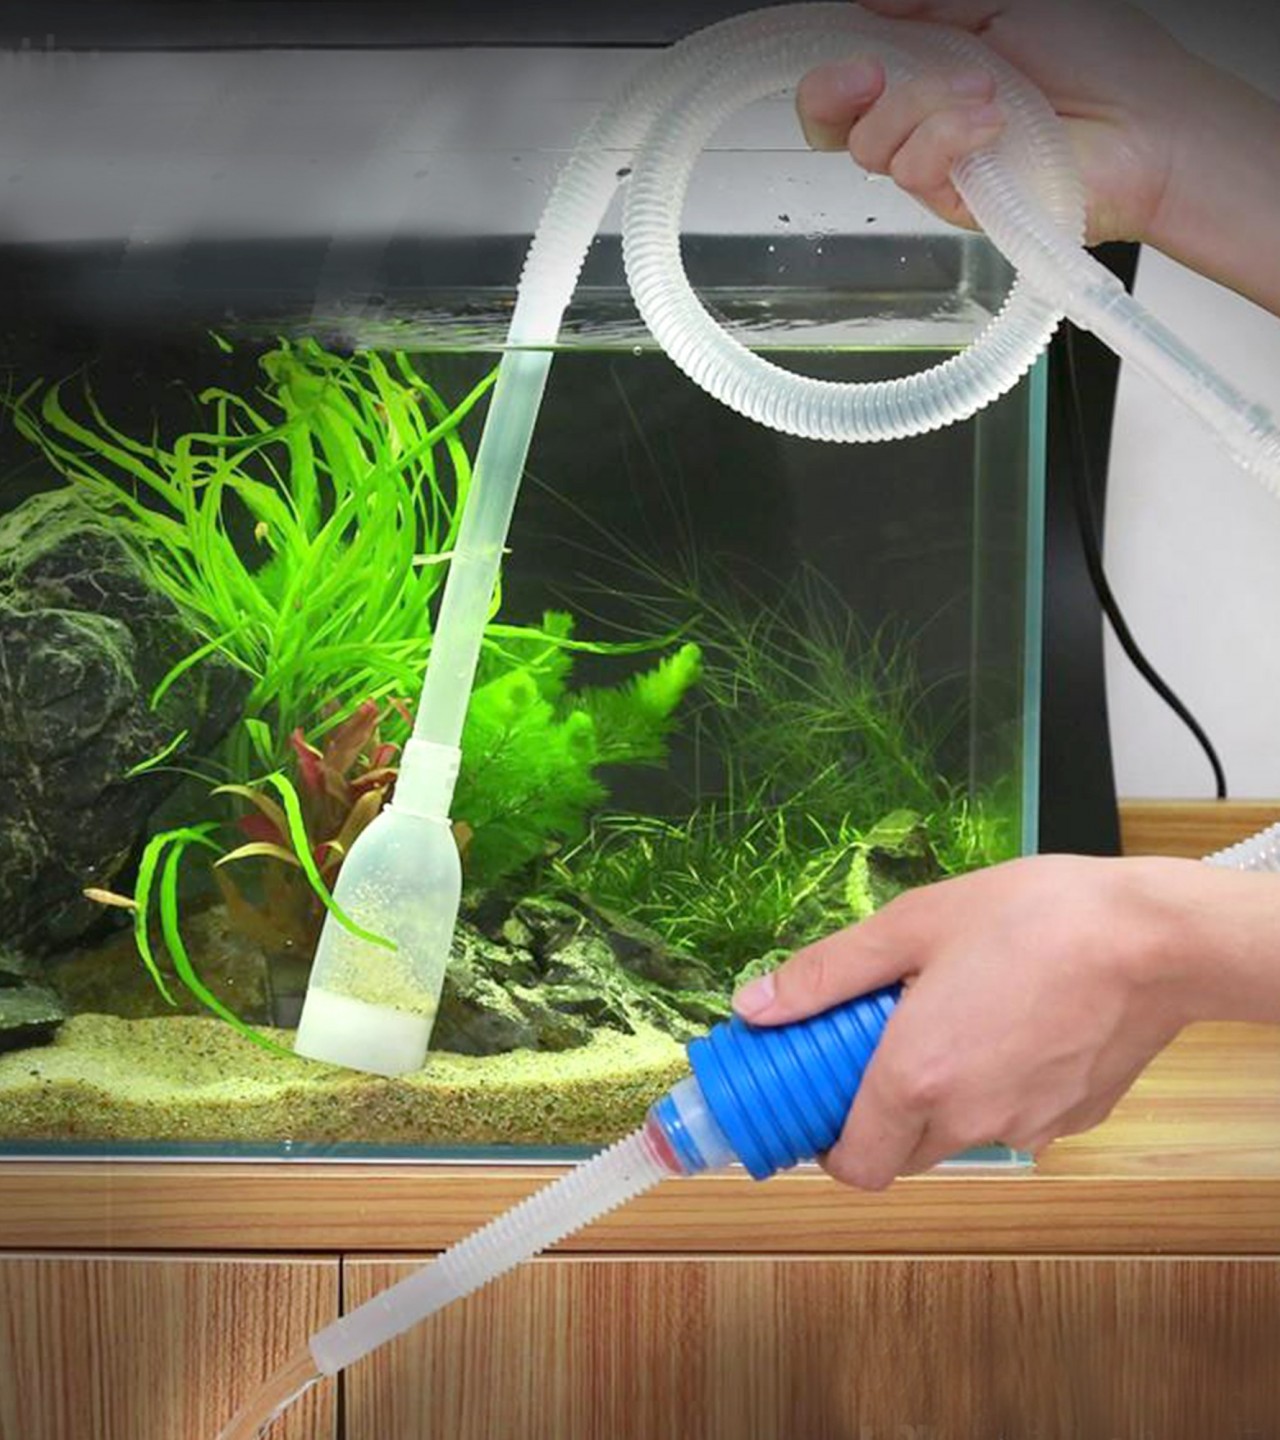 Fish Aquarium Cleaning Siphon Pipe - Water Suction/Changing made easy